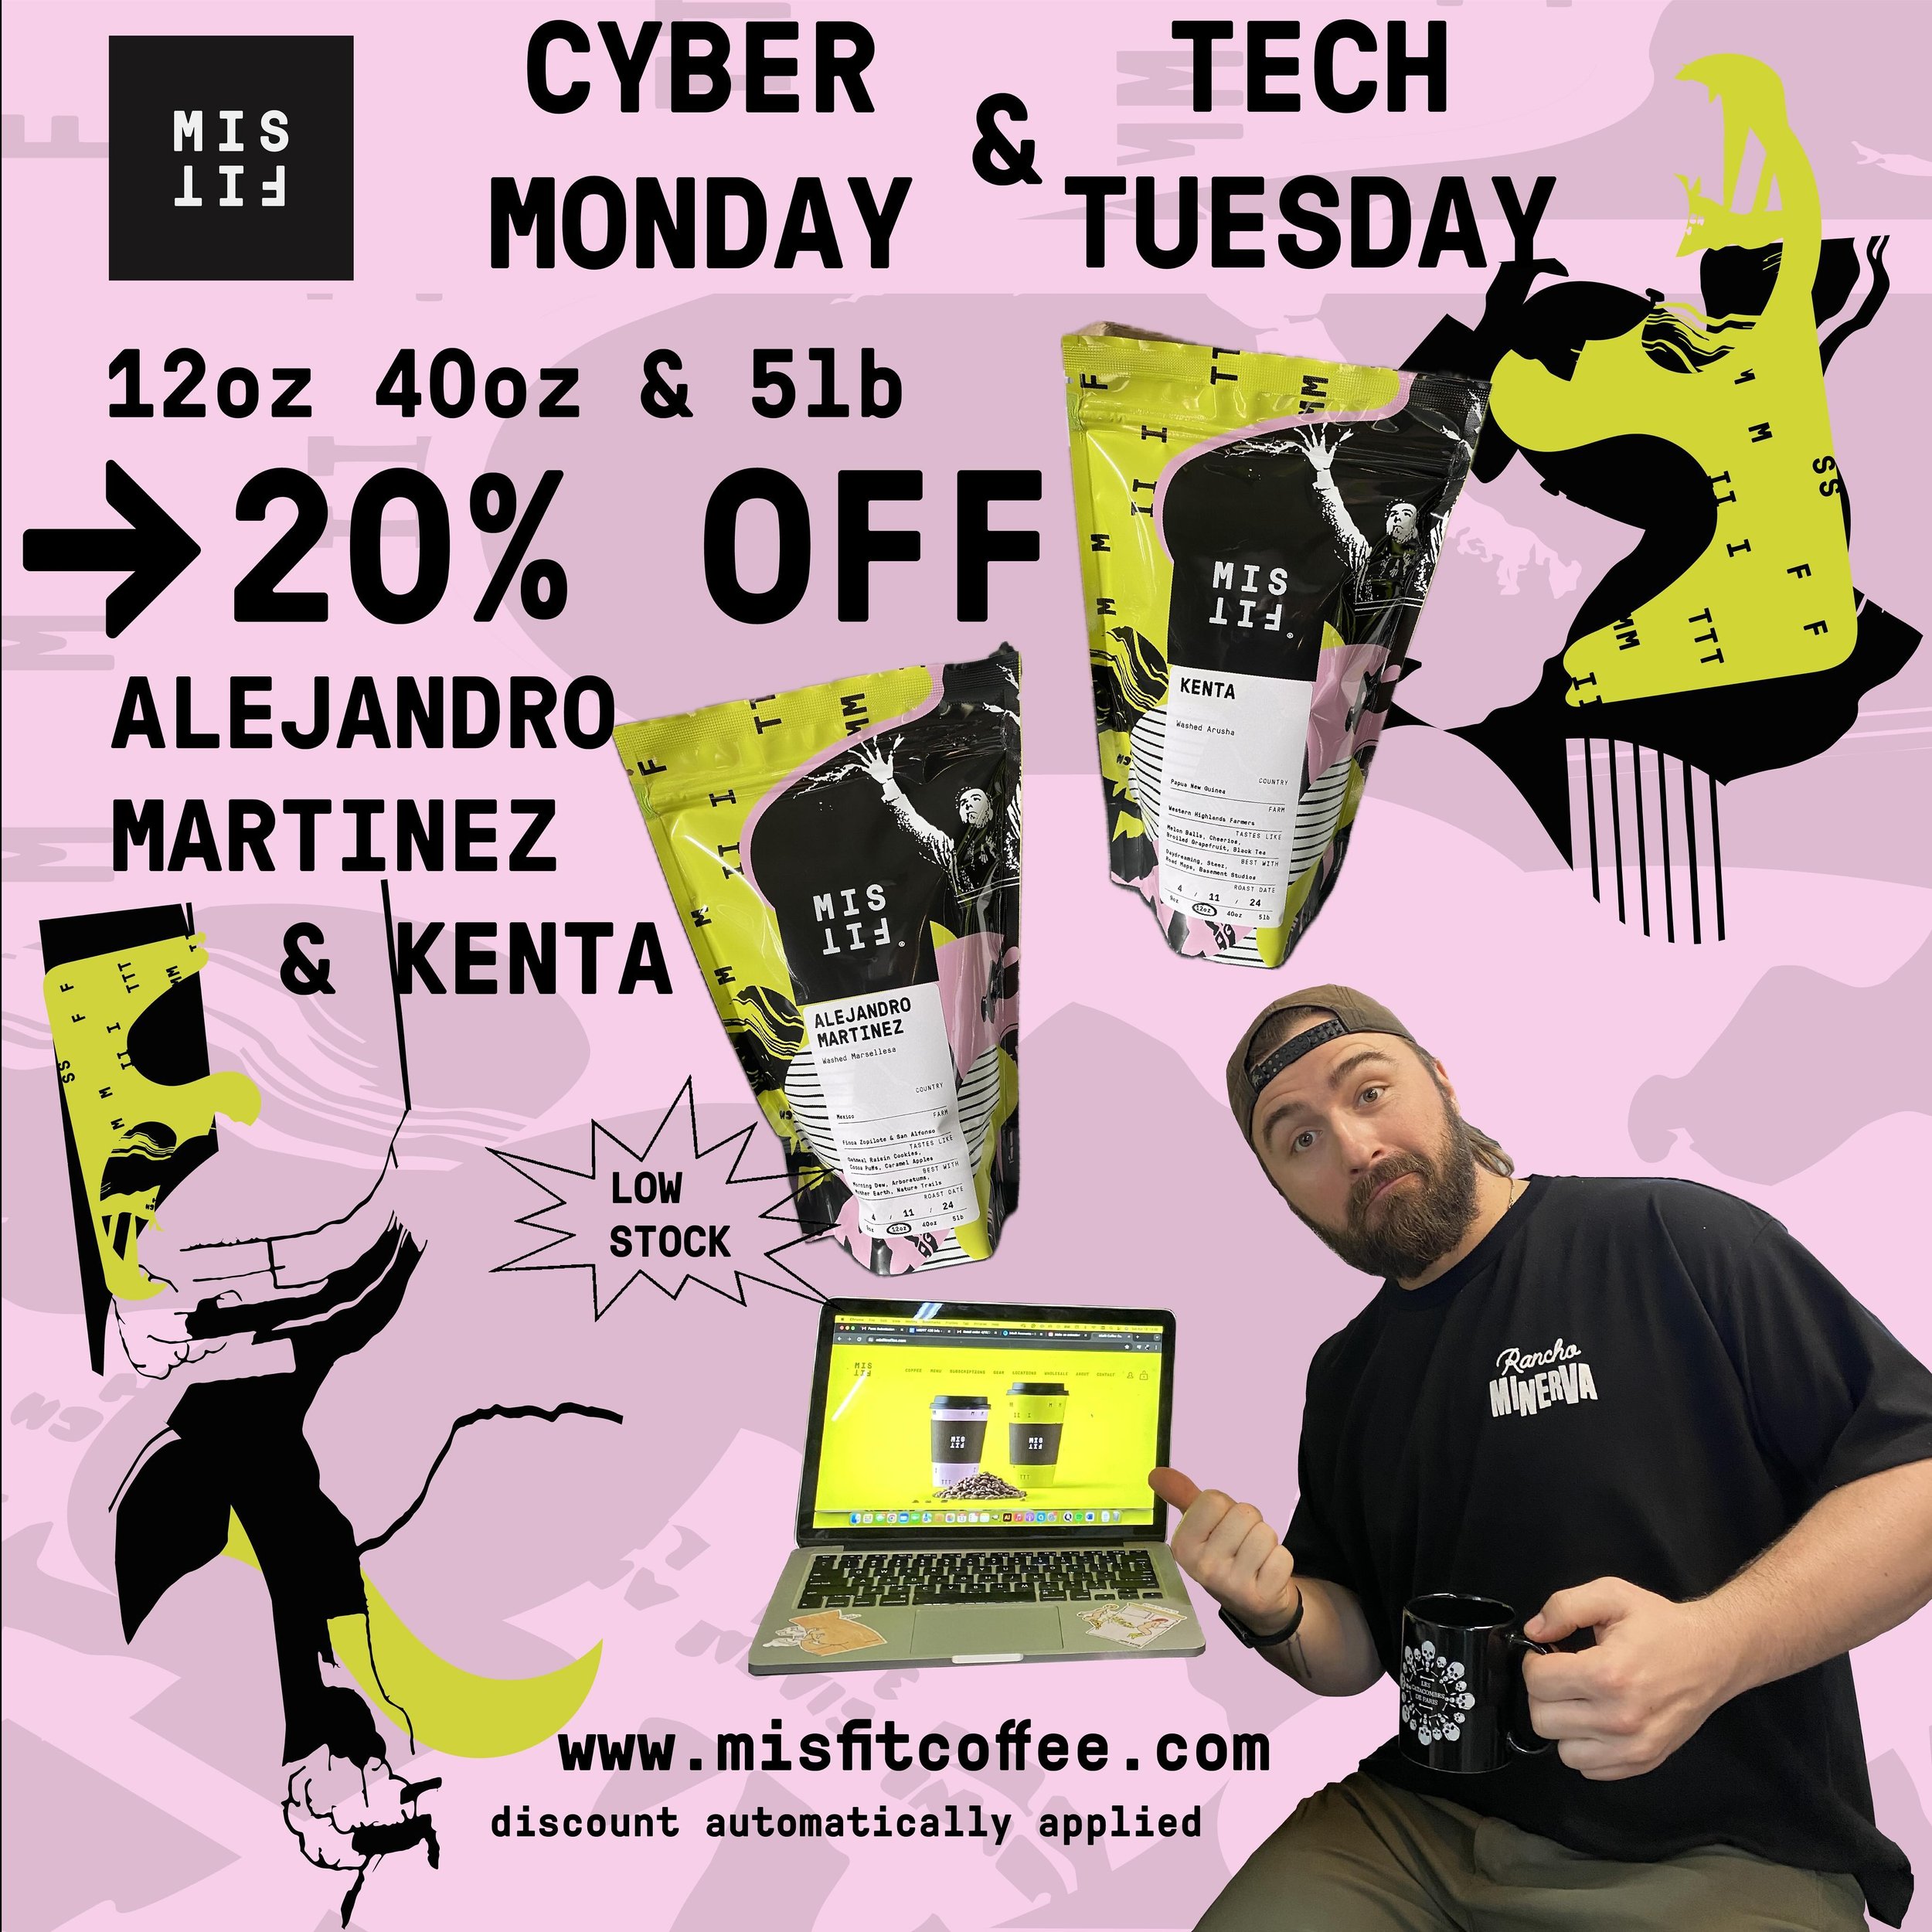 Cyber Monday &amp; Tech Tuesday are here 💻 📱 🛜 
Exclusive online discounts of 20% off!

From here on out, we will be offering big discounts online Monday and Tuesday each week. You can&rsquo;t get Misfit in person, but you can still get Misfit. 

